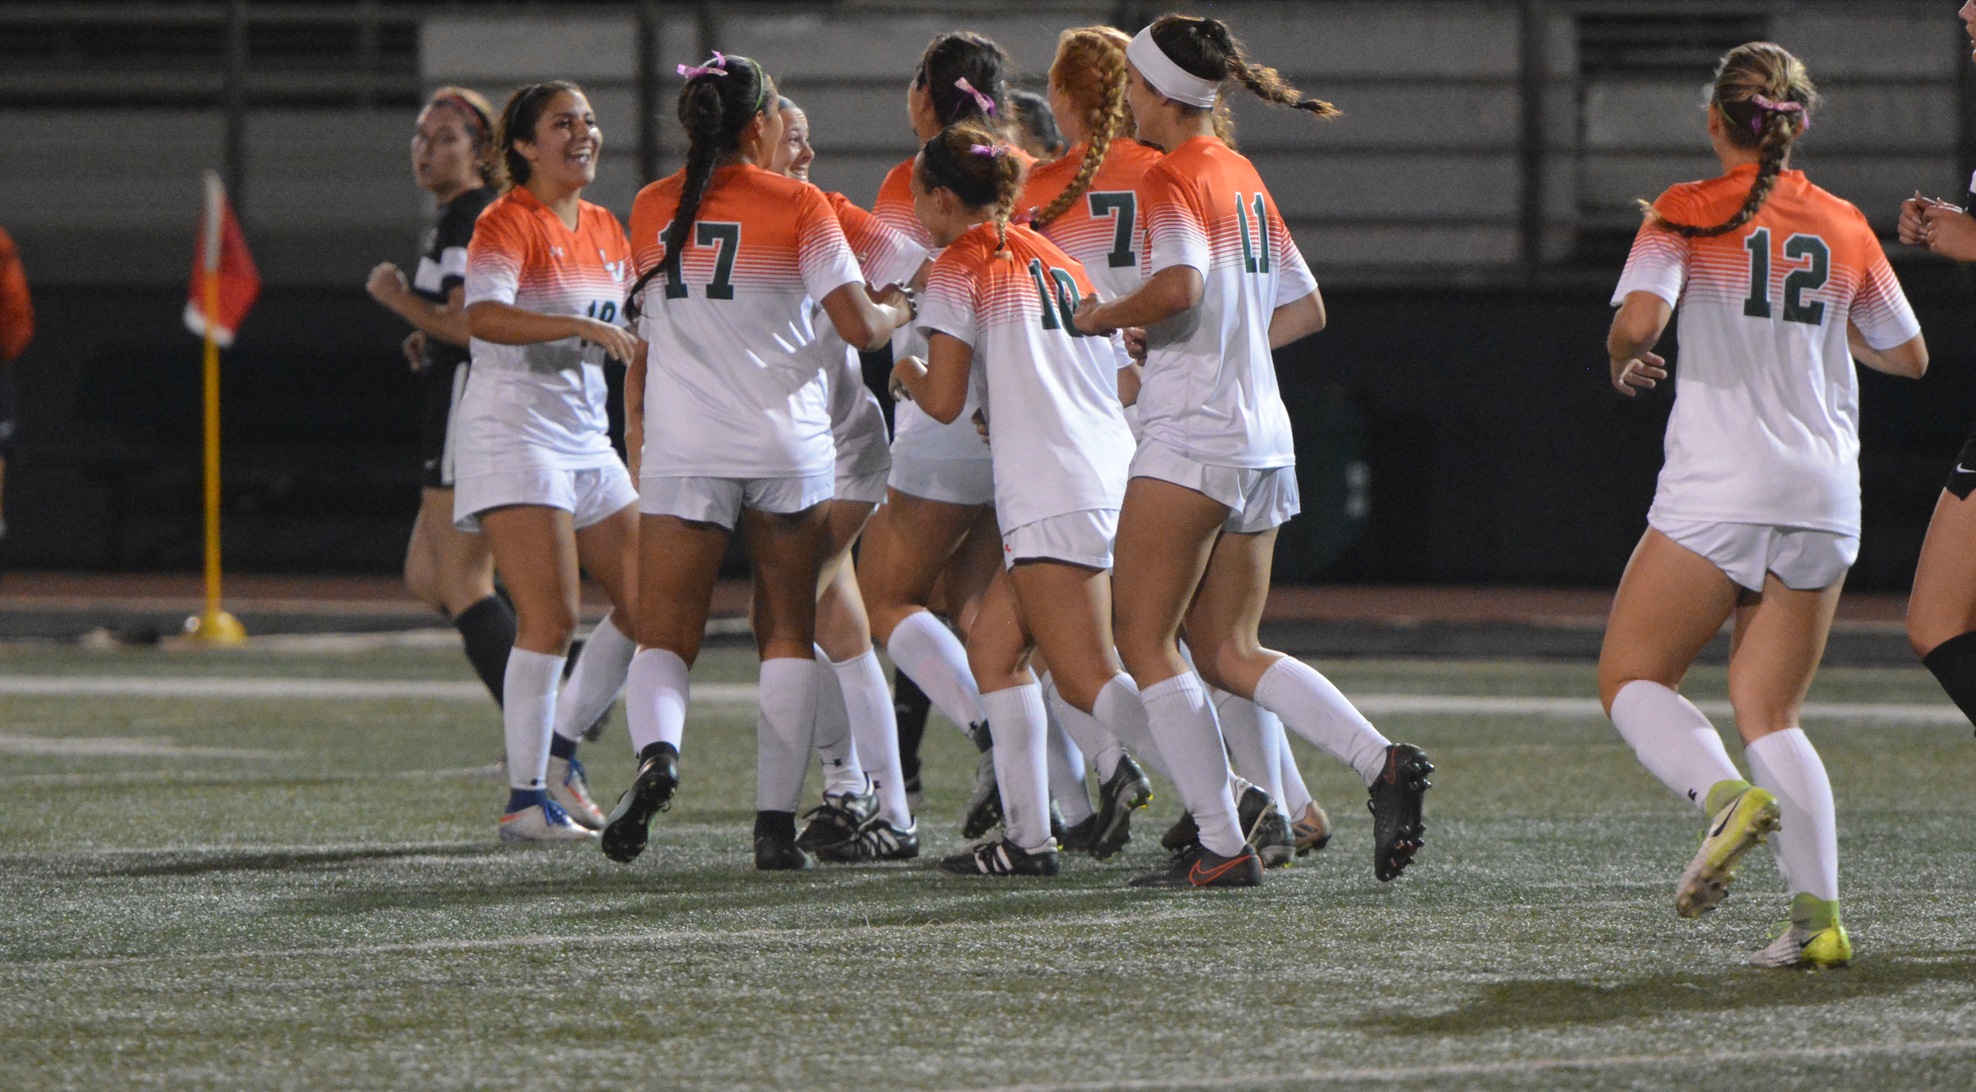 Women's Soccer beats Sagehens, moves into 2nd place